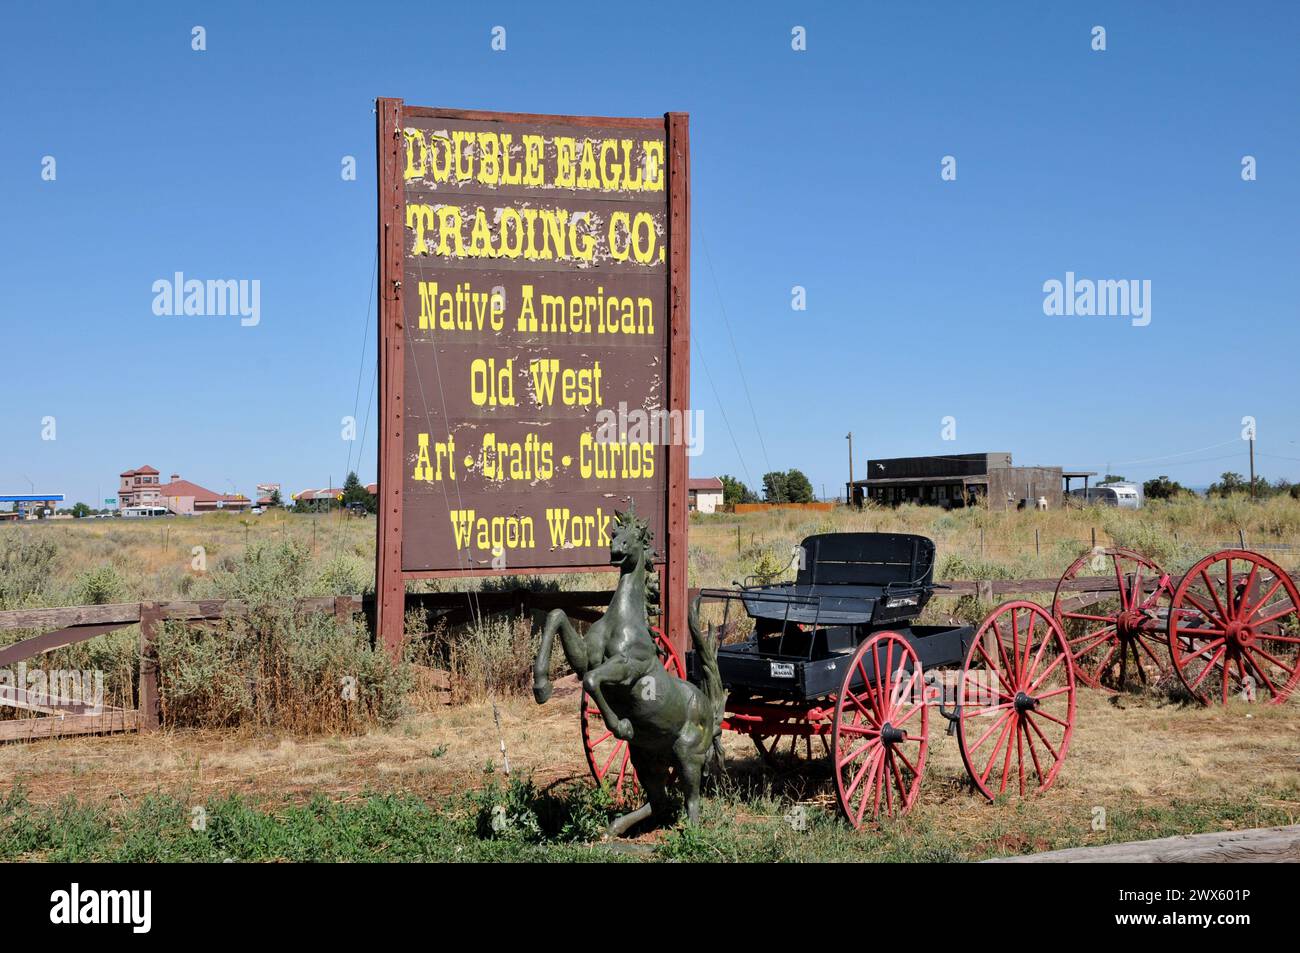 Valle Kaibab national forest area /Arizona/USA /  09.September 2019 / Double eagle trading company in Valle and market Native american,old west craft curisos  wagon work in Valle Arizona United States.  (Photo. Francis Dean/Deanpictures) Stock Photo